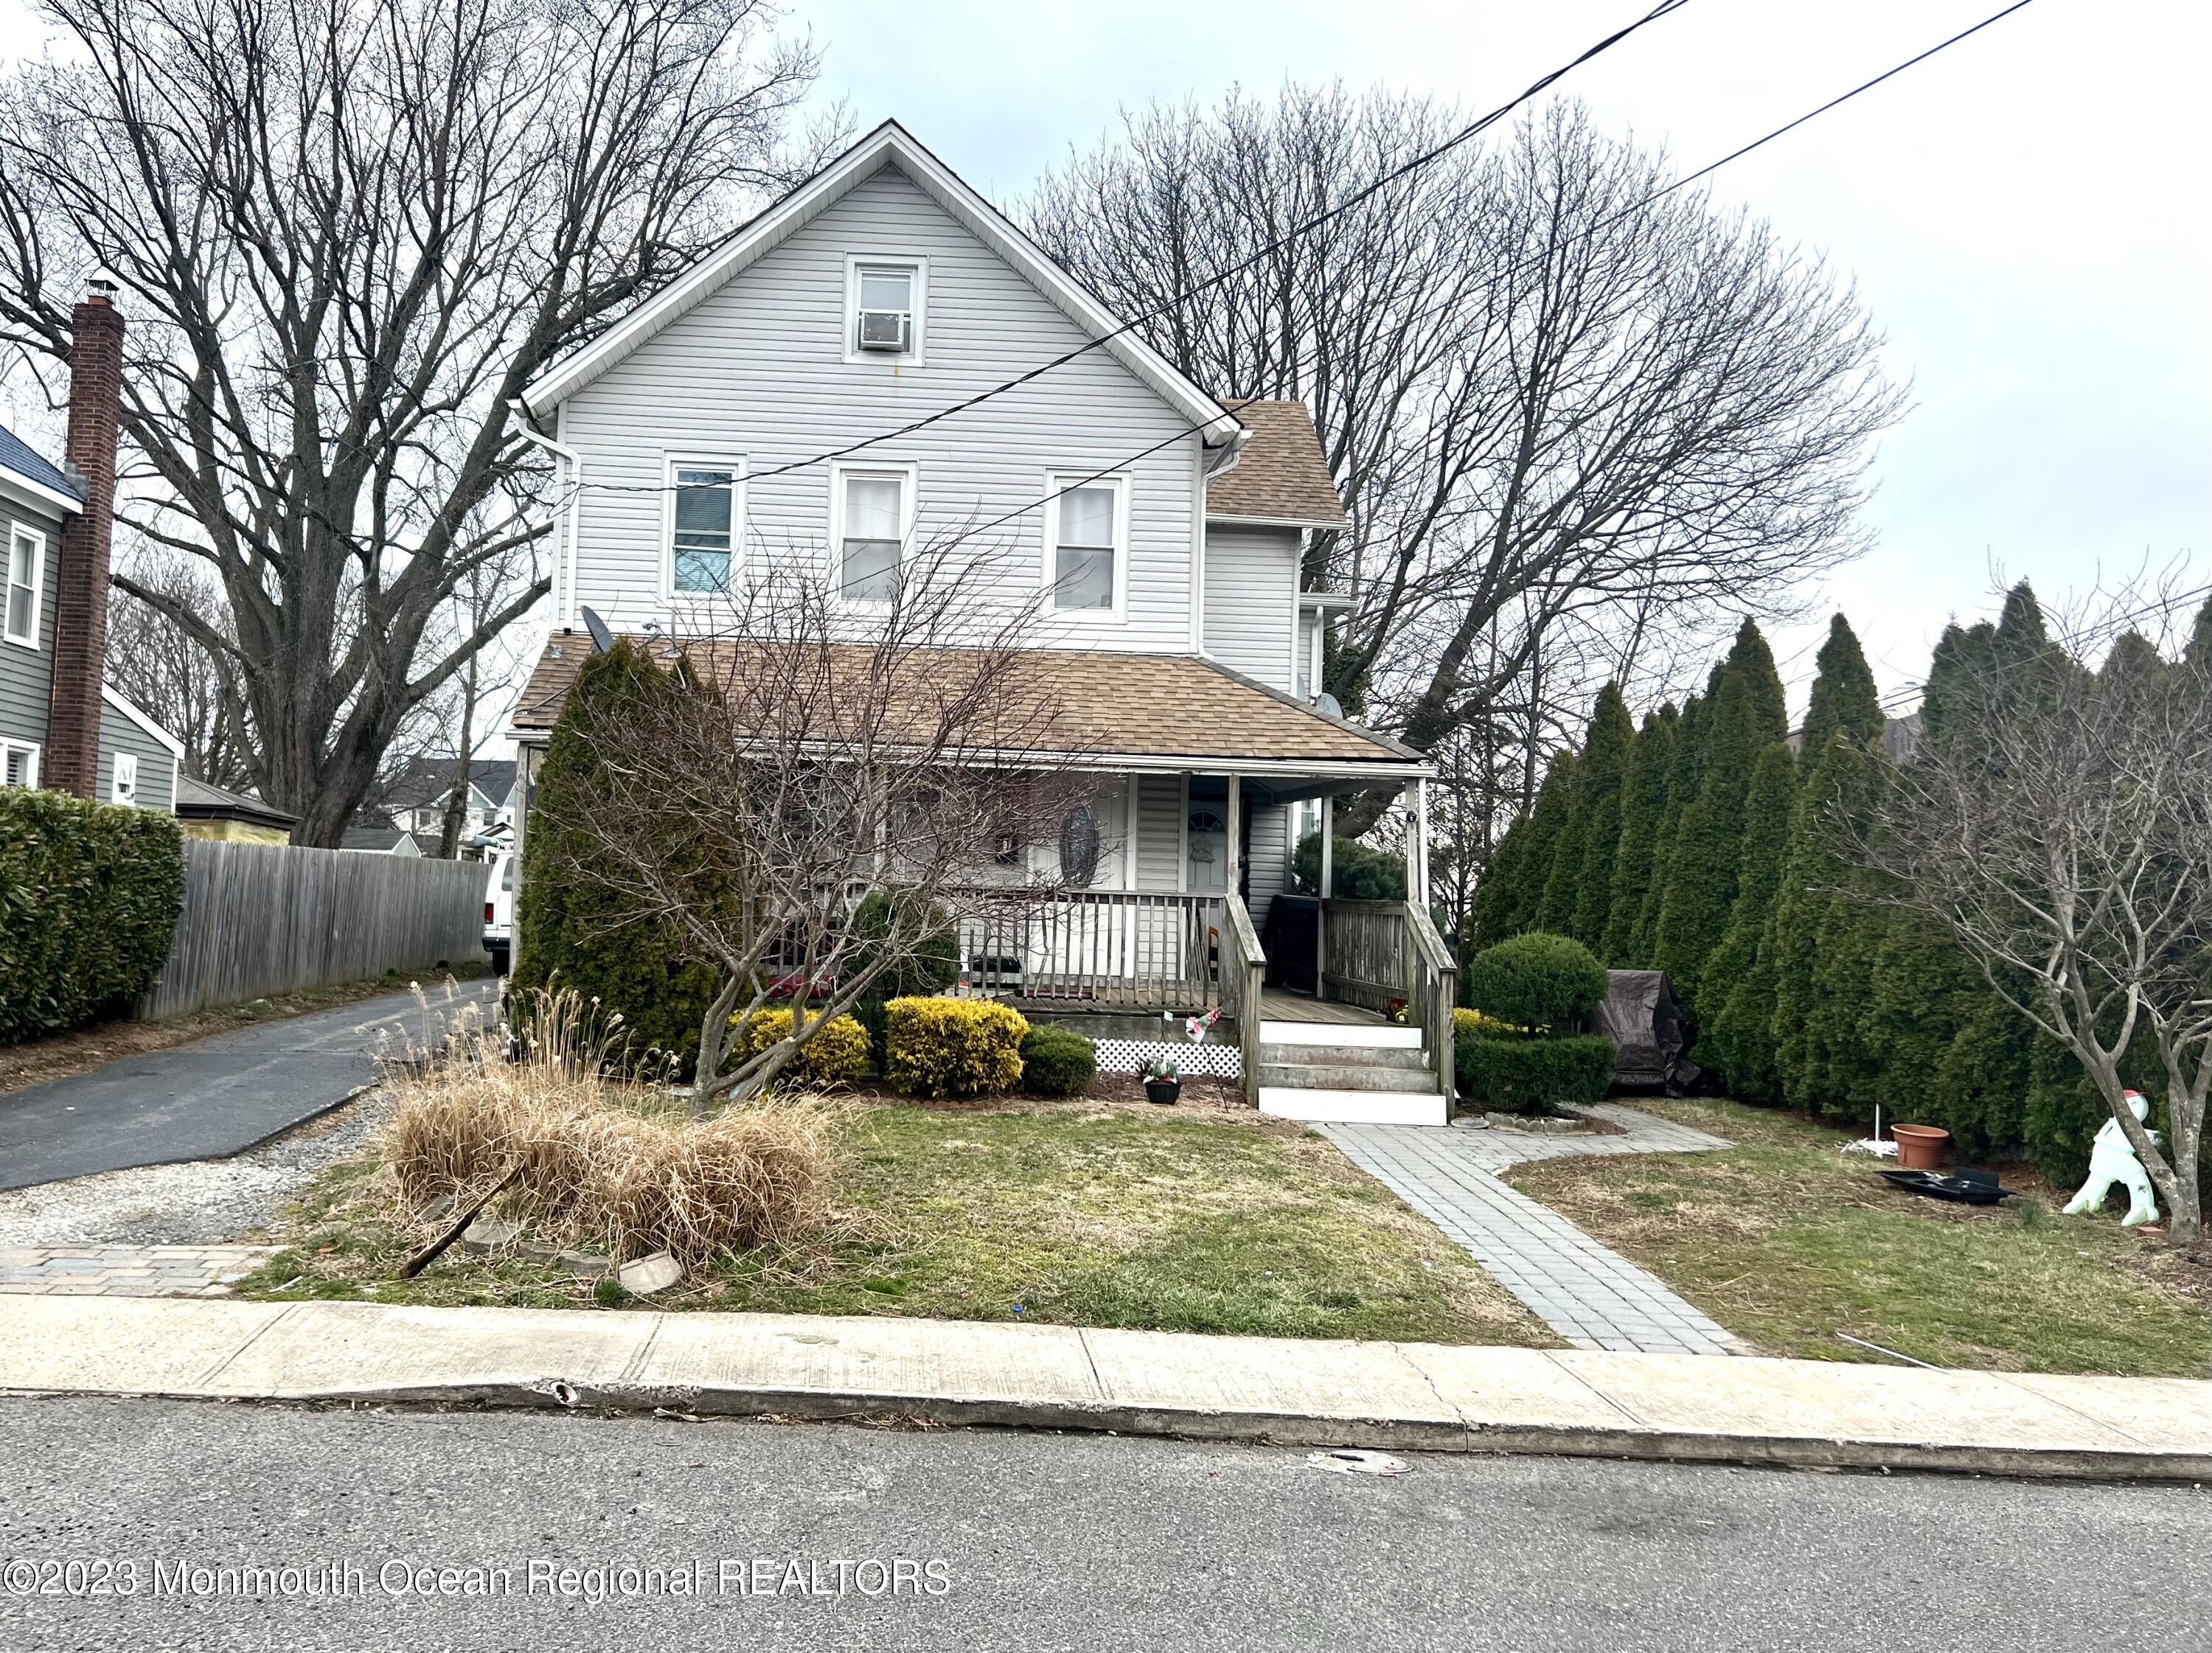 Long Branch, NJ Real Estate Housing Market & Trends | Better Homes and Gardens<sup>®</sup> Real Estate